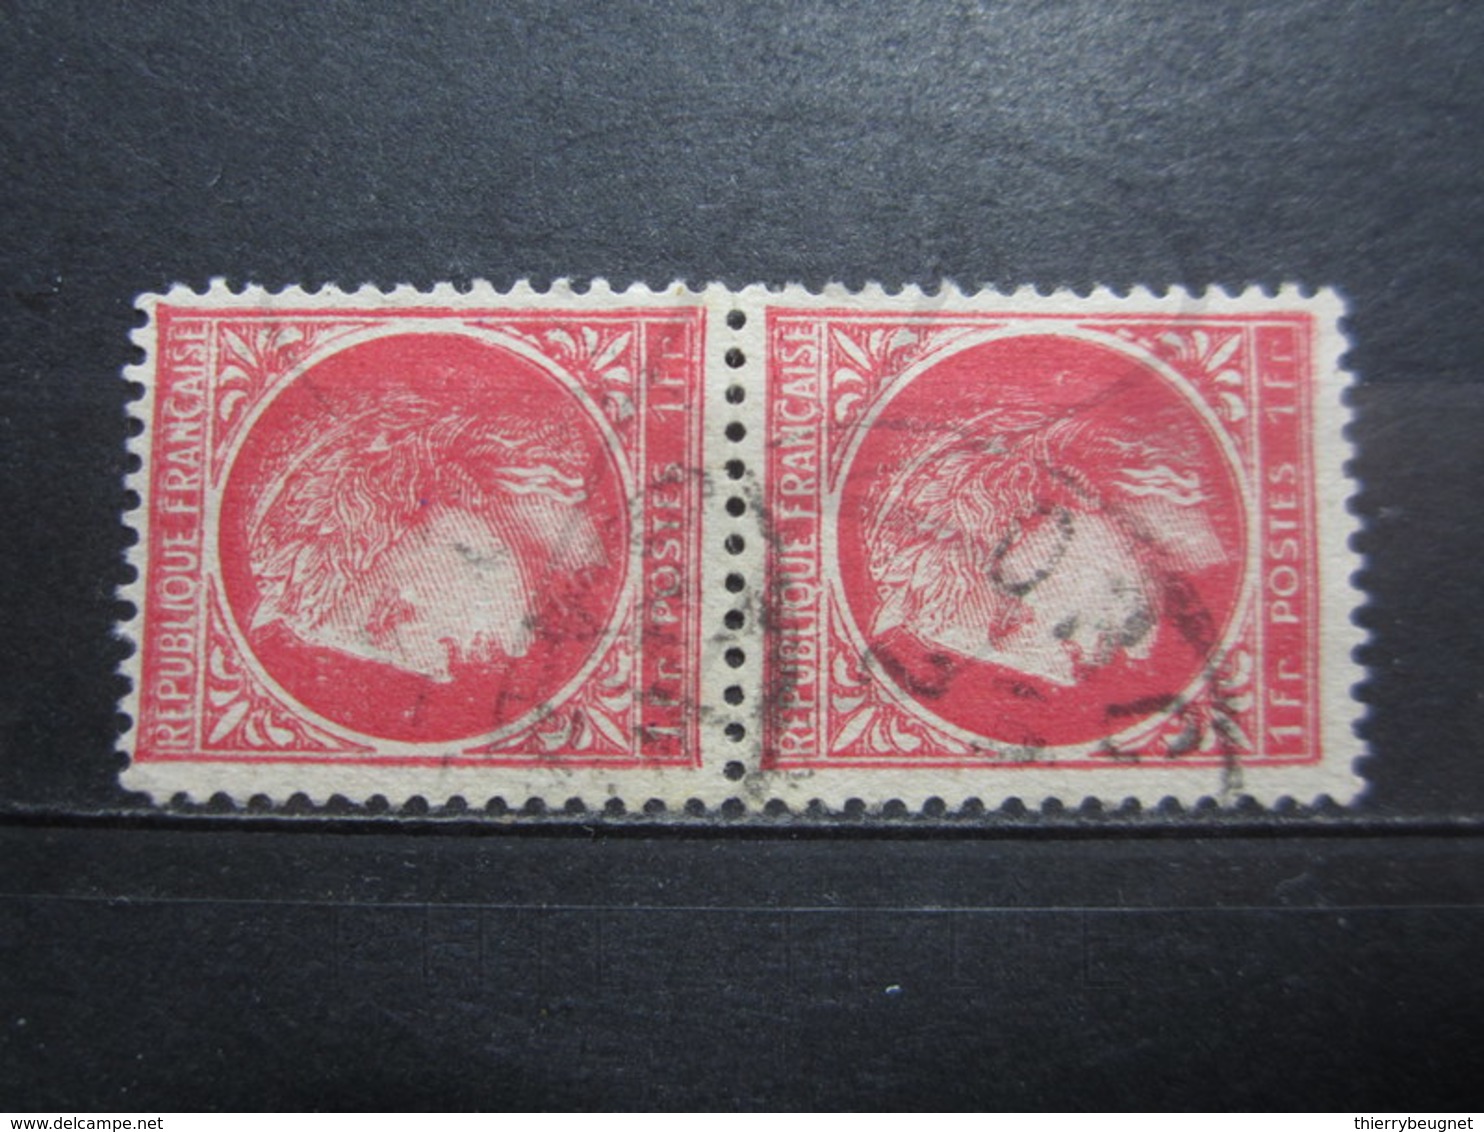 VEND BEAUX TIMBRES FRANCE N° 676 EN PAIRE , IMPRESSION DECALEE !!! - Used Stamps